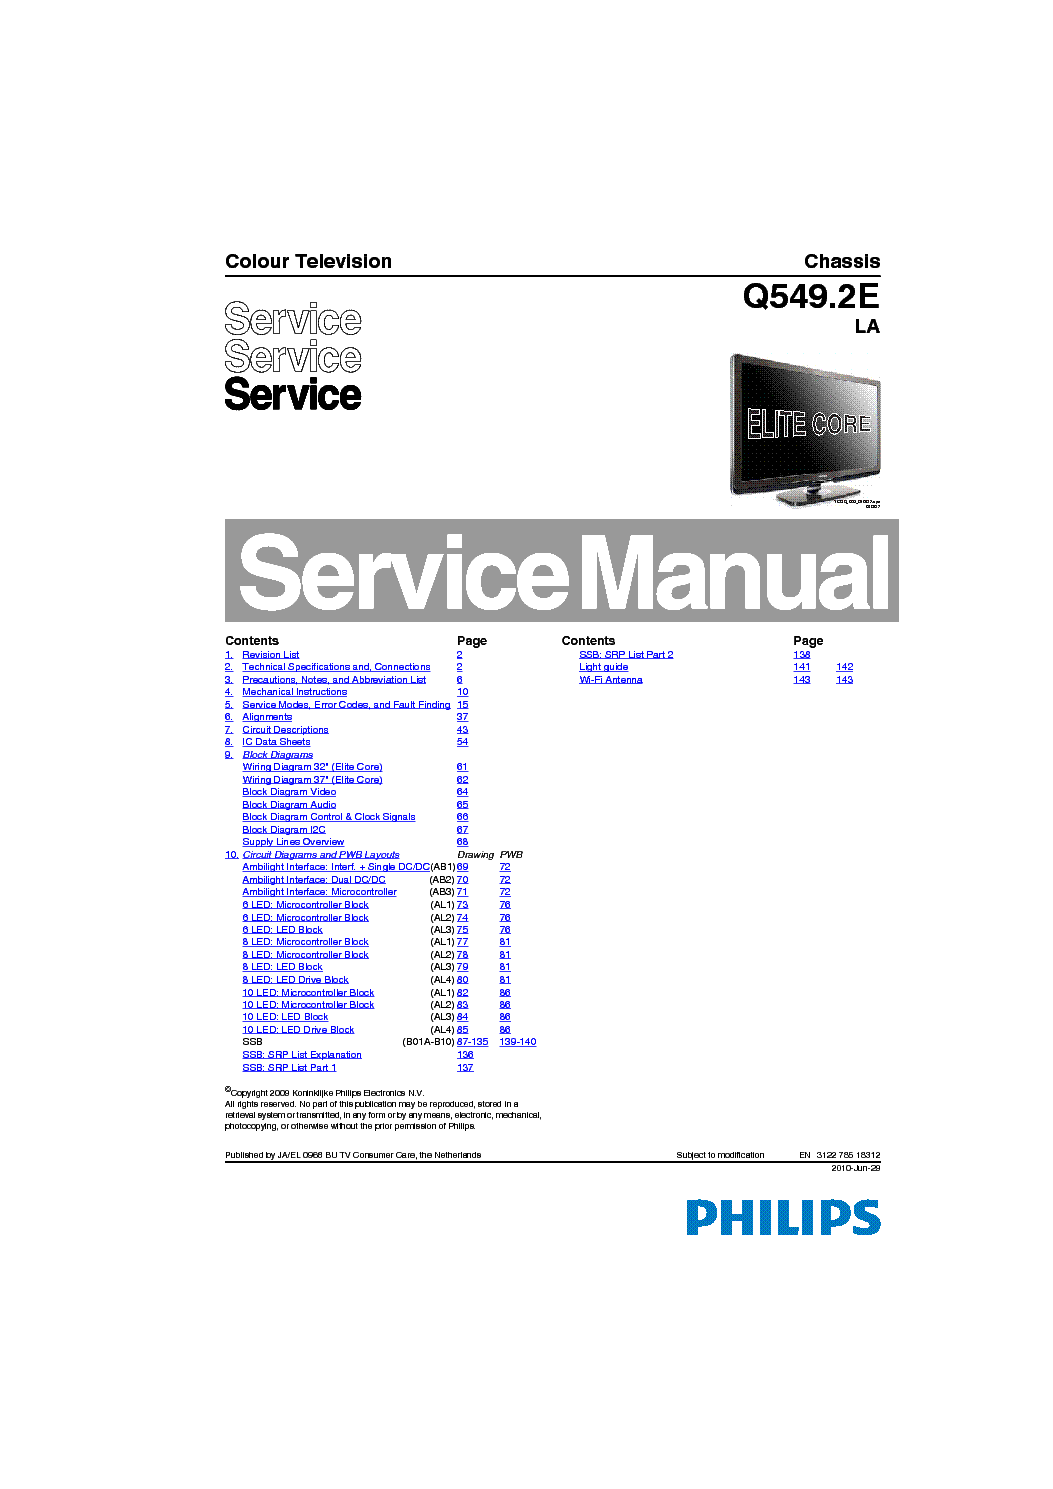 PHILIPS Q549.2ELA service manual (1st page)